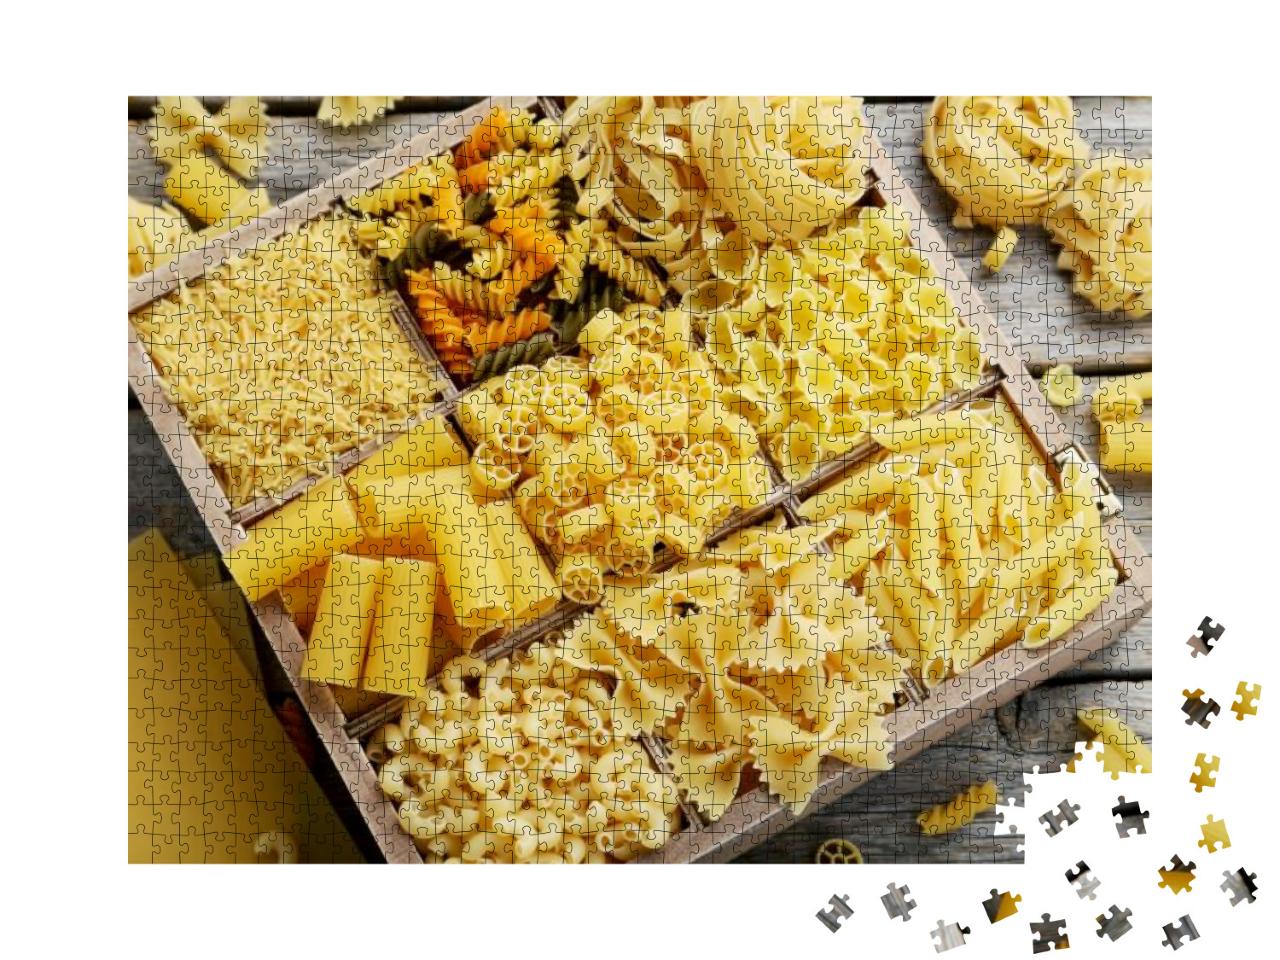 Different Kinds of Pasta on Grey Wooden Table... Jigsaw Puzzle with 1000 pieces